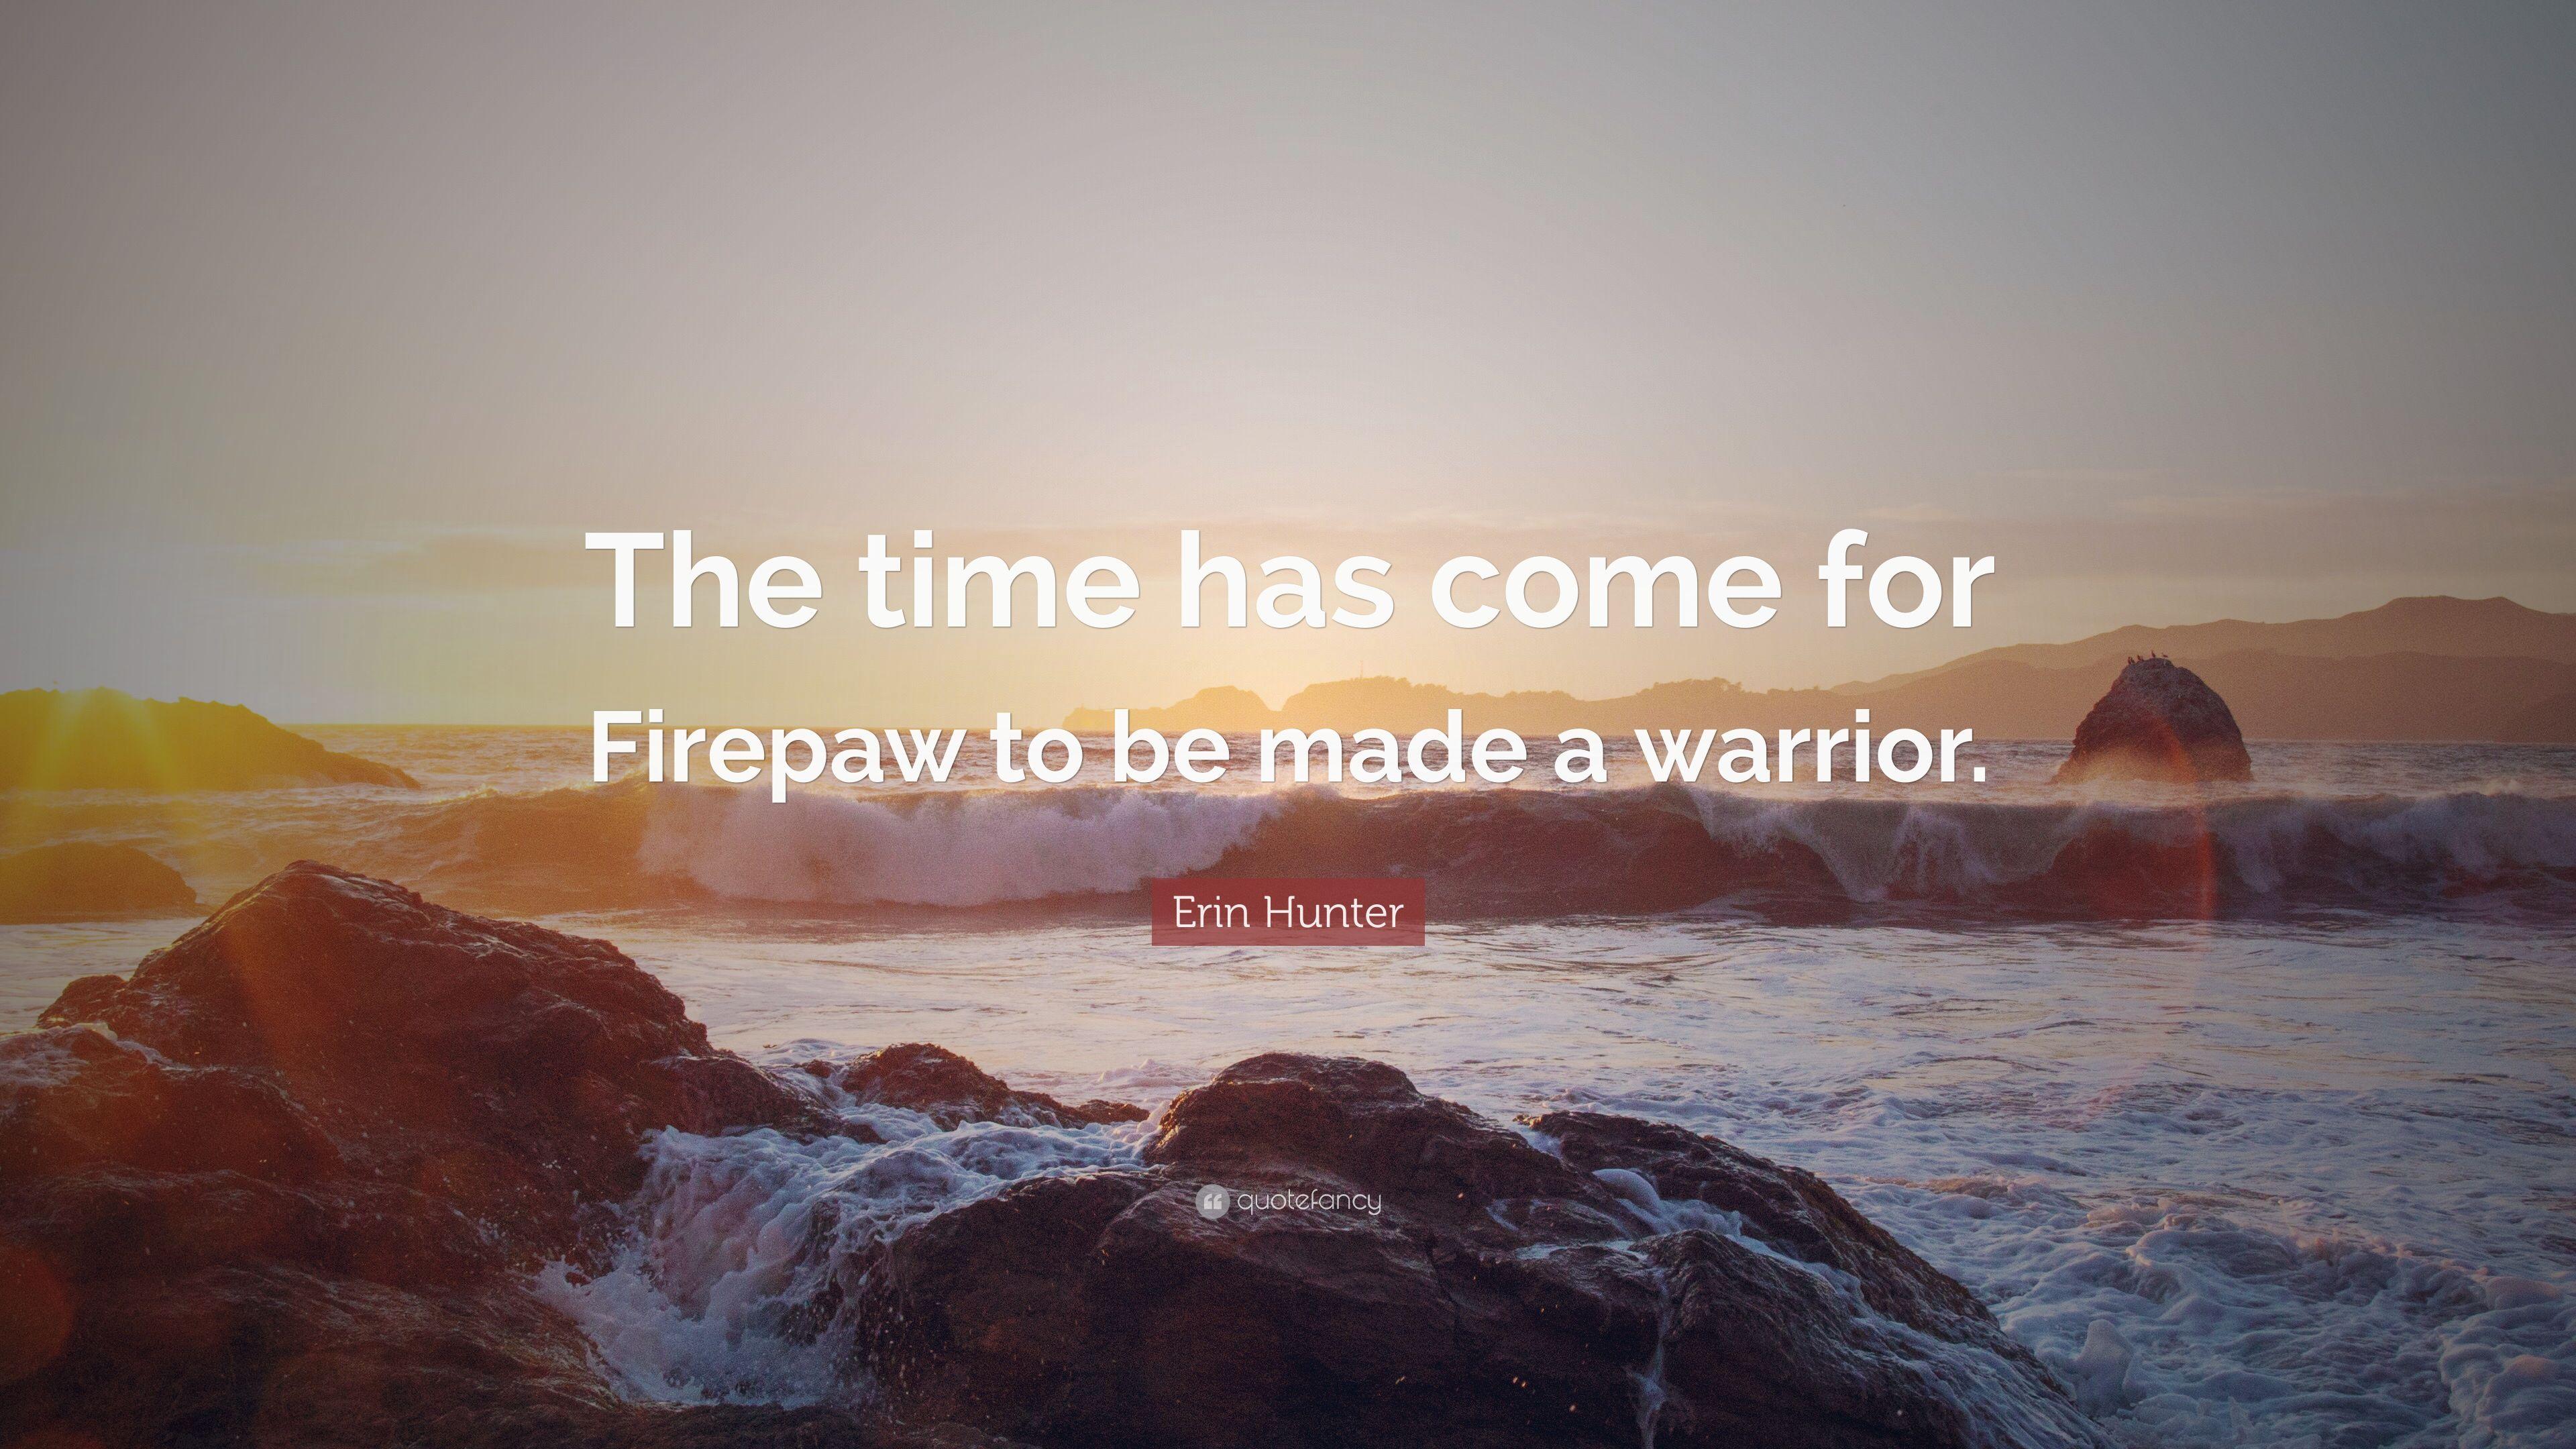 Erin Hunter Quote: "The time has come for Firepaw to be made 